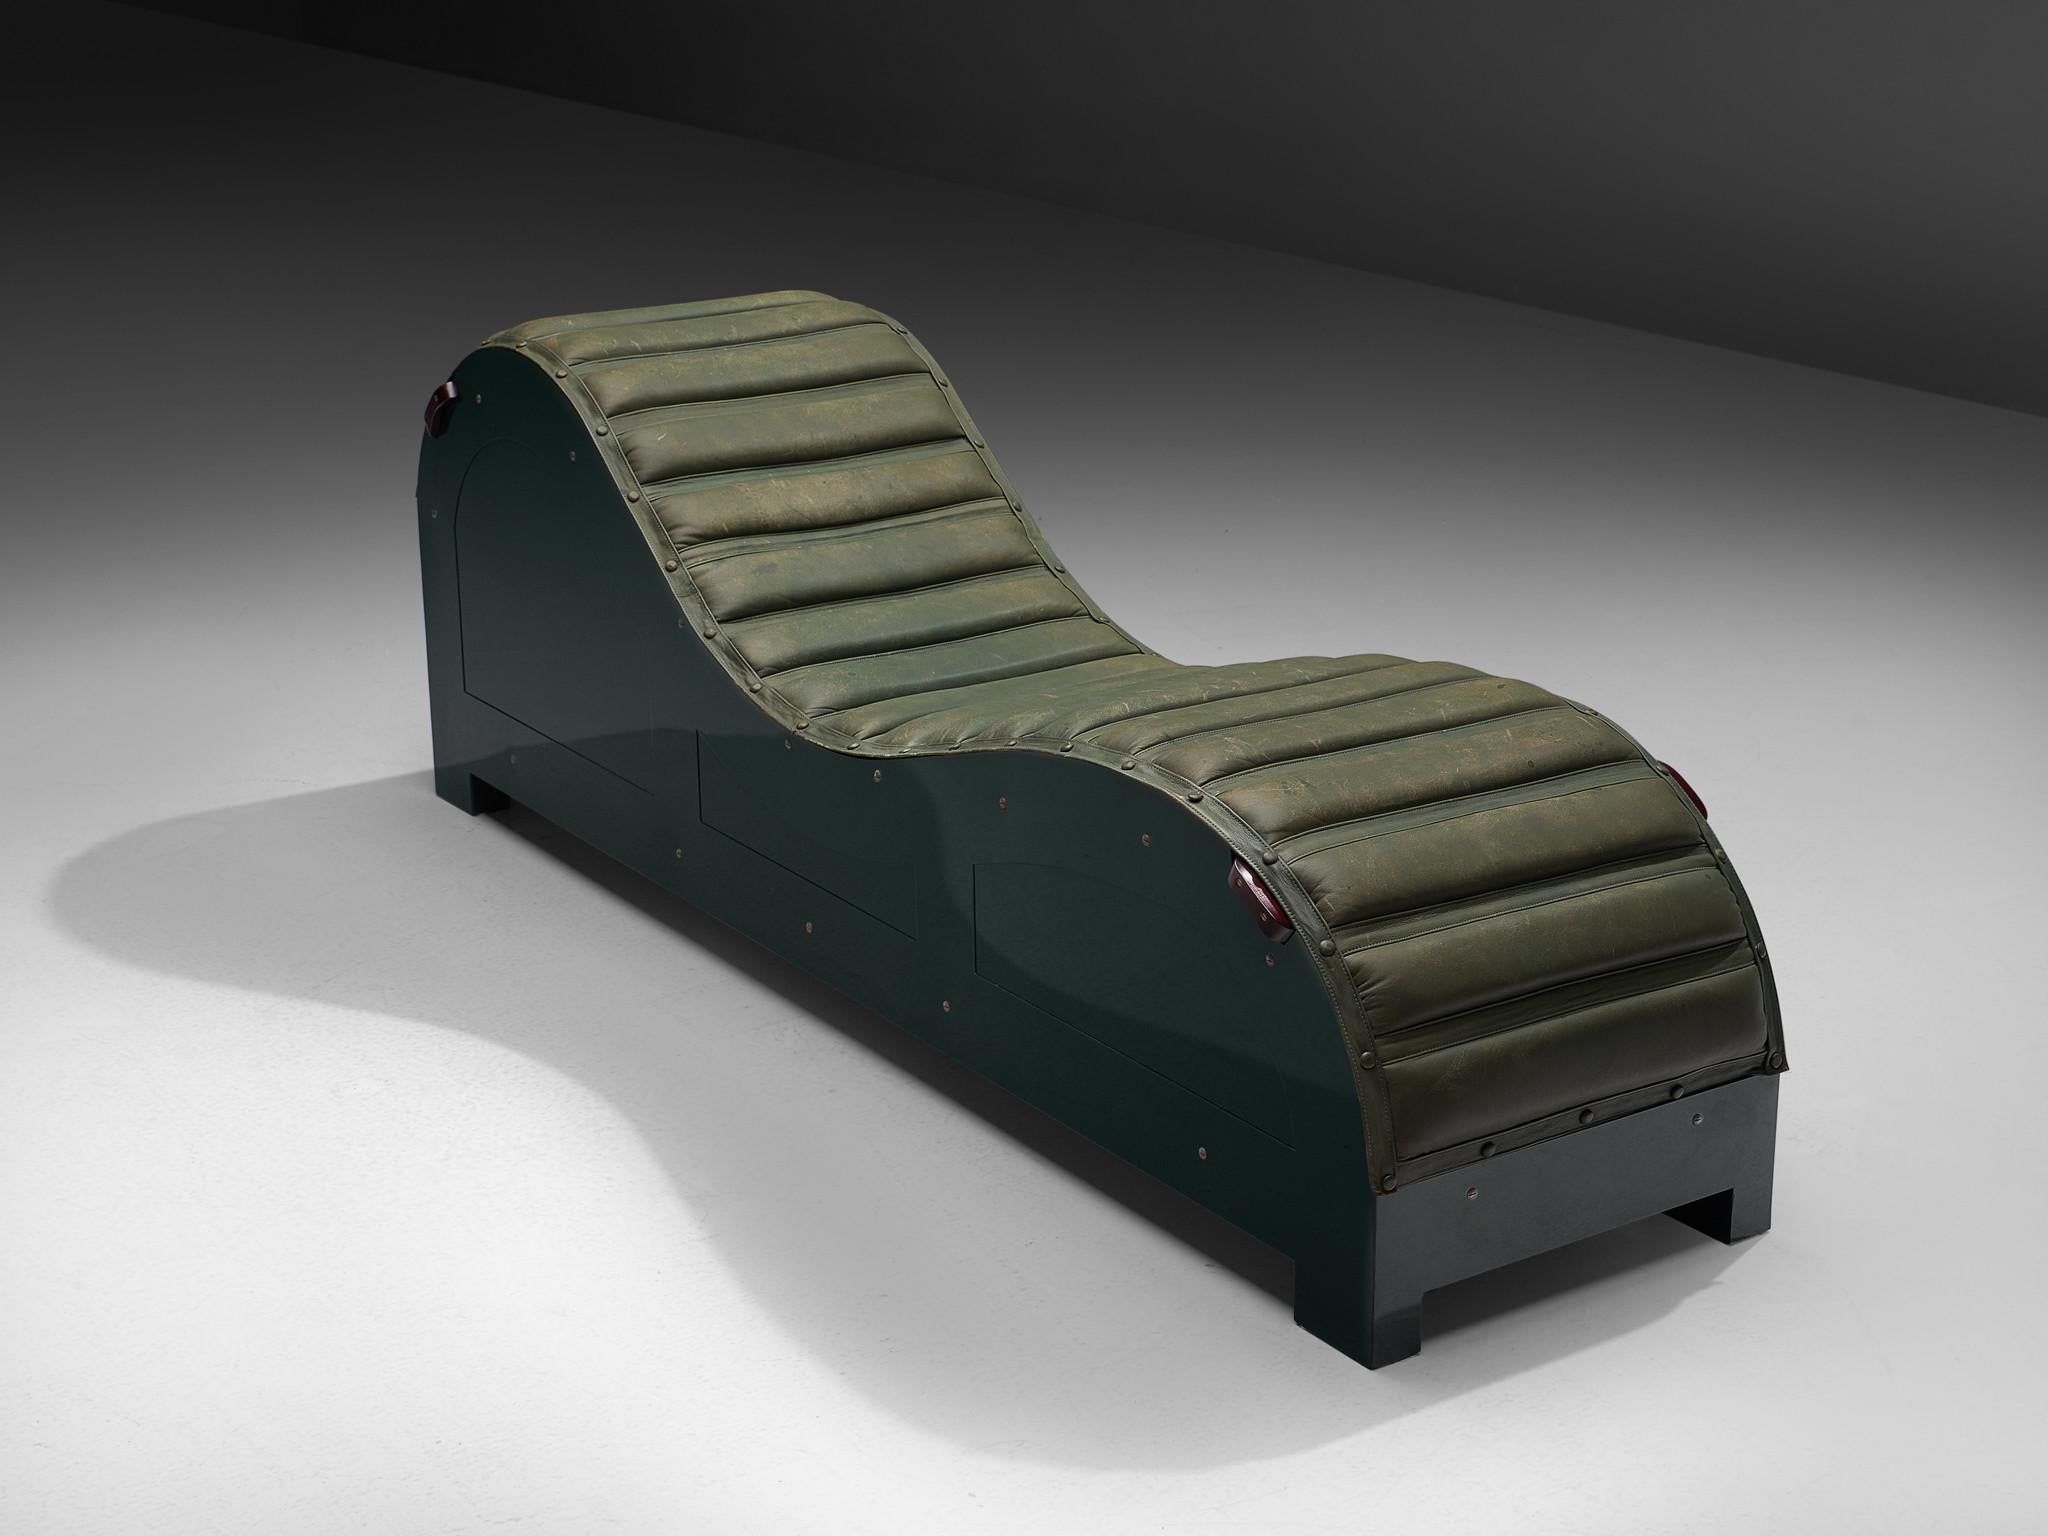 Mats Theselius for Källemo Limited Edition Chaise Lounge in Green Leather